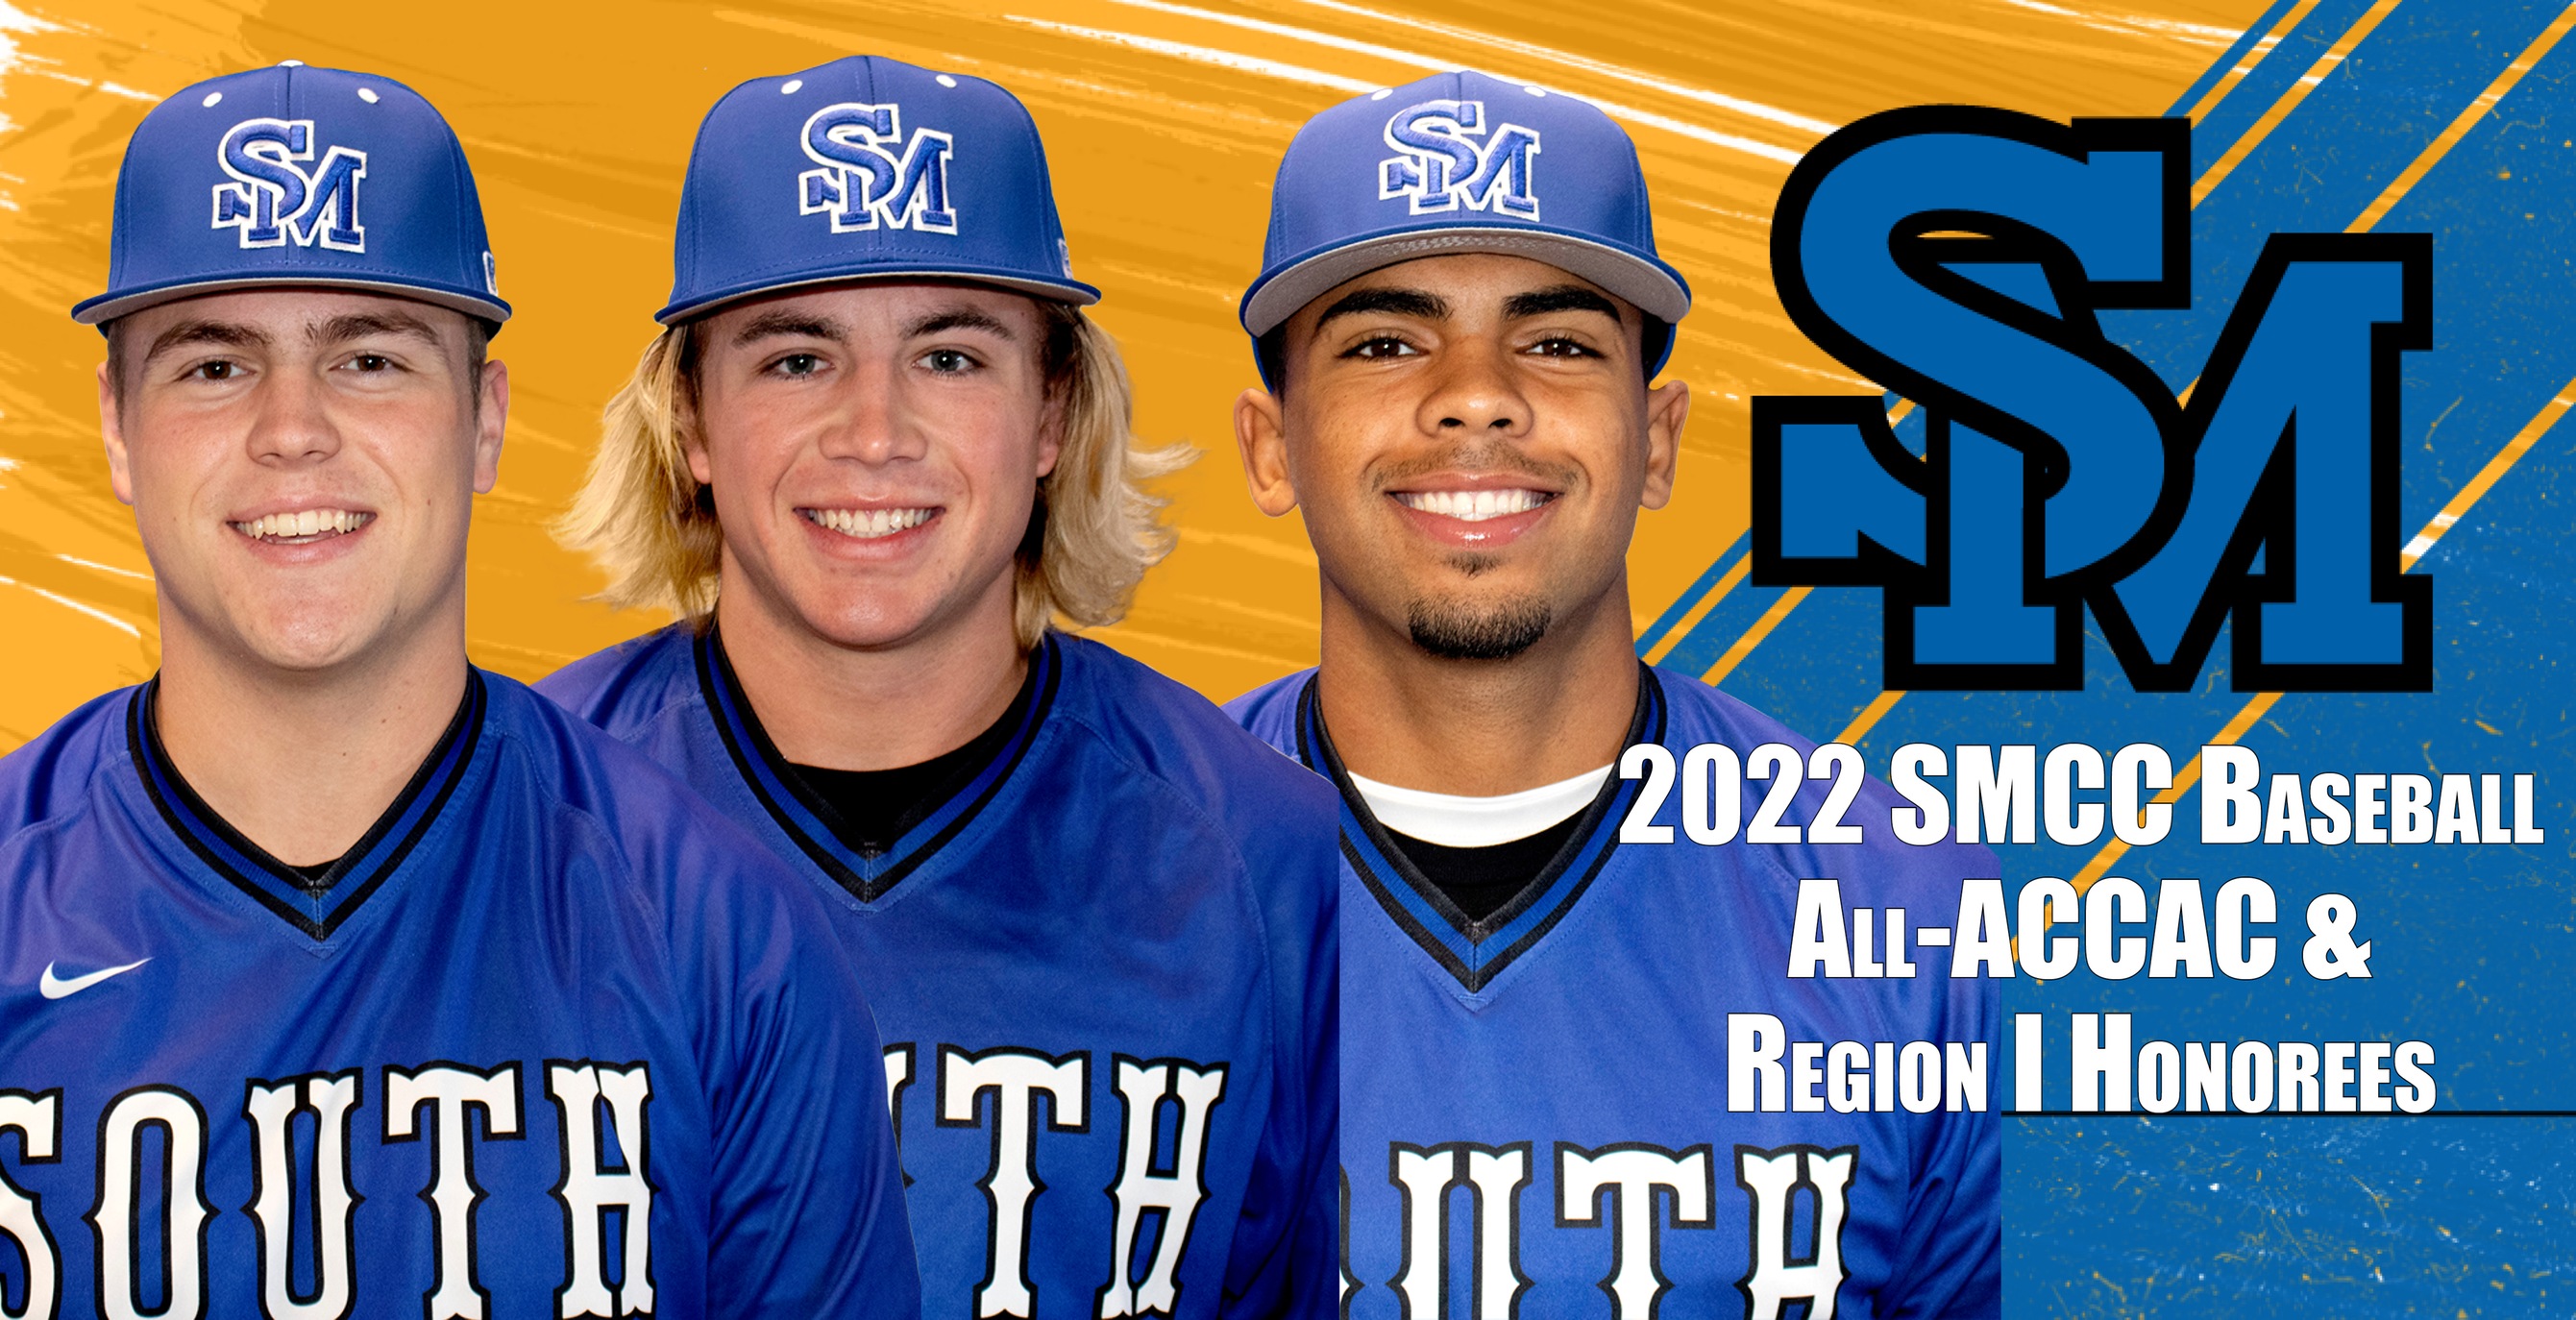 Cougar Trio Earns All-ACCAC Honors, Jayden Smith Named All-Region